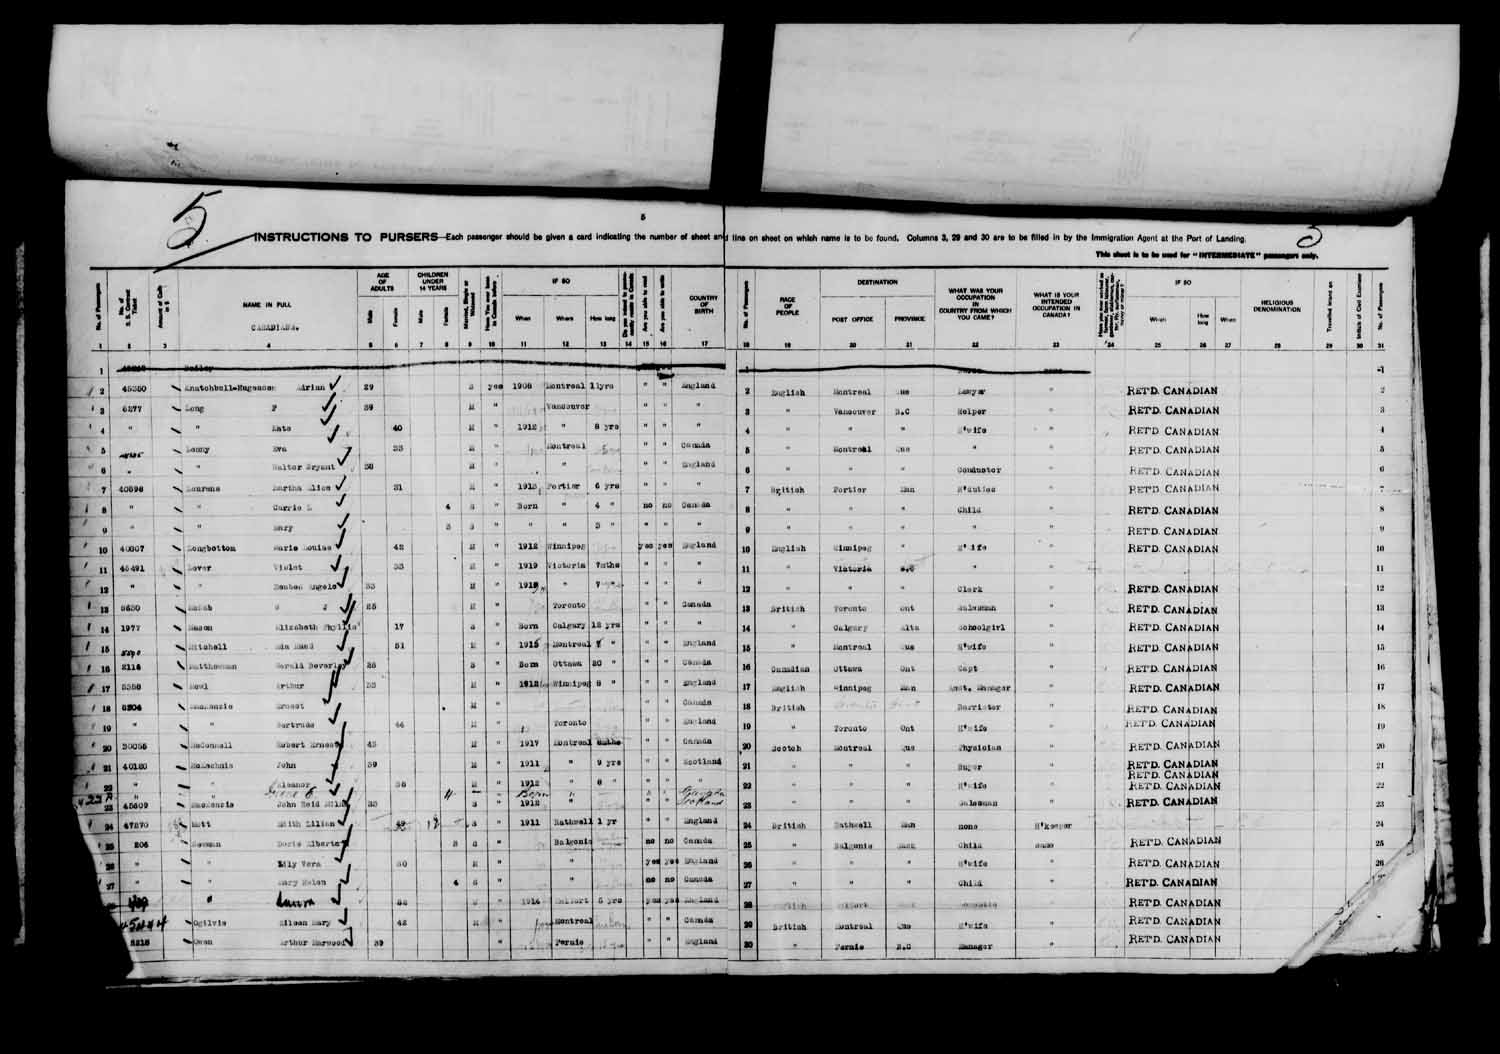 Digitized page of Passenger Lists for Image No.: e003610612